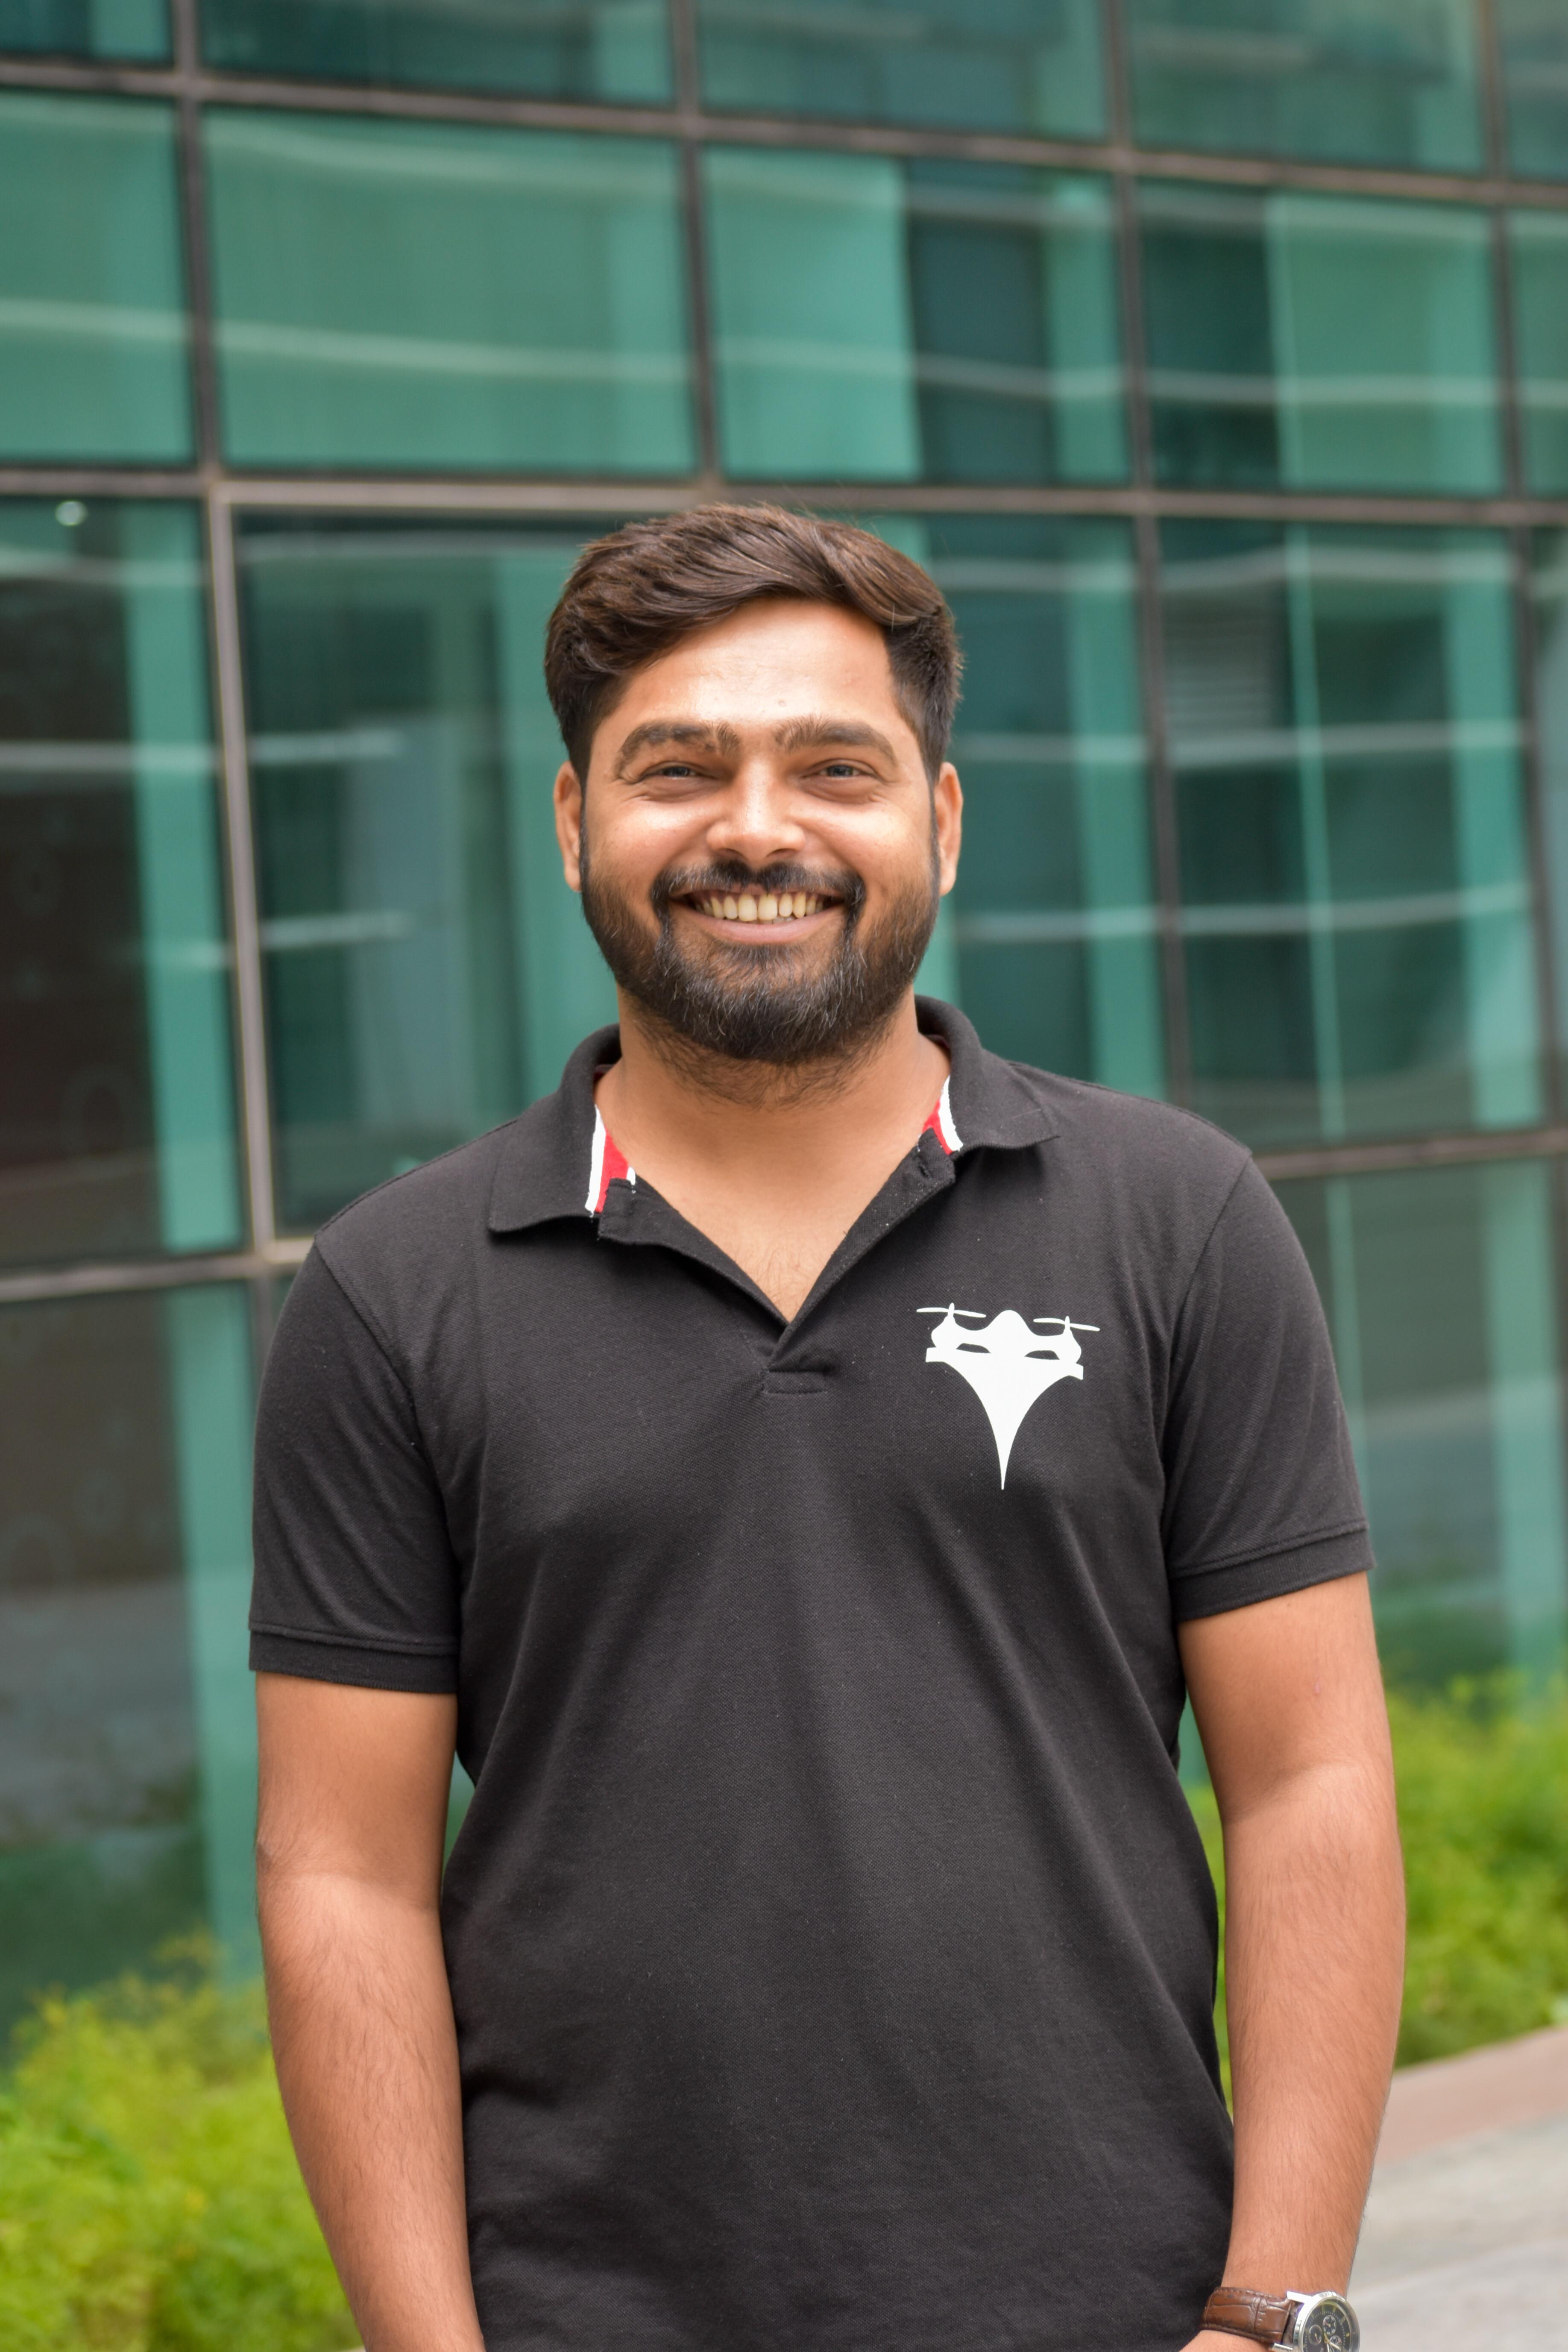 Rimanshu Pandey is the Founder & CTO, TSAW Drones fo TSAW drones.